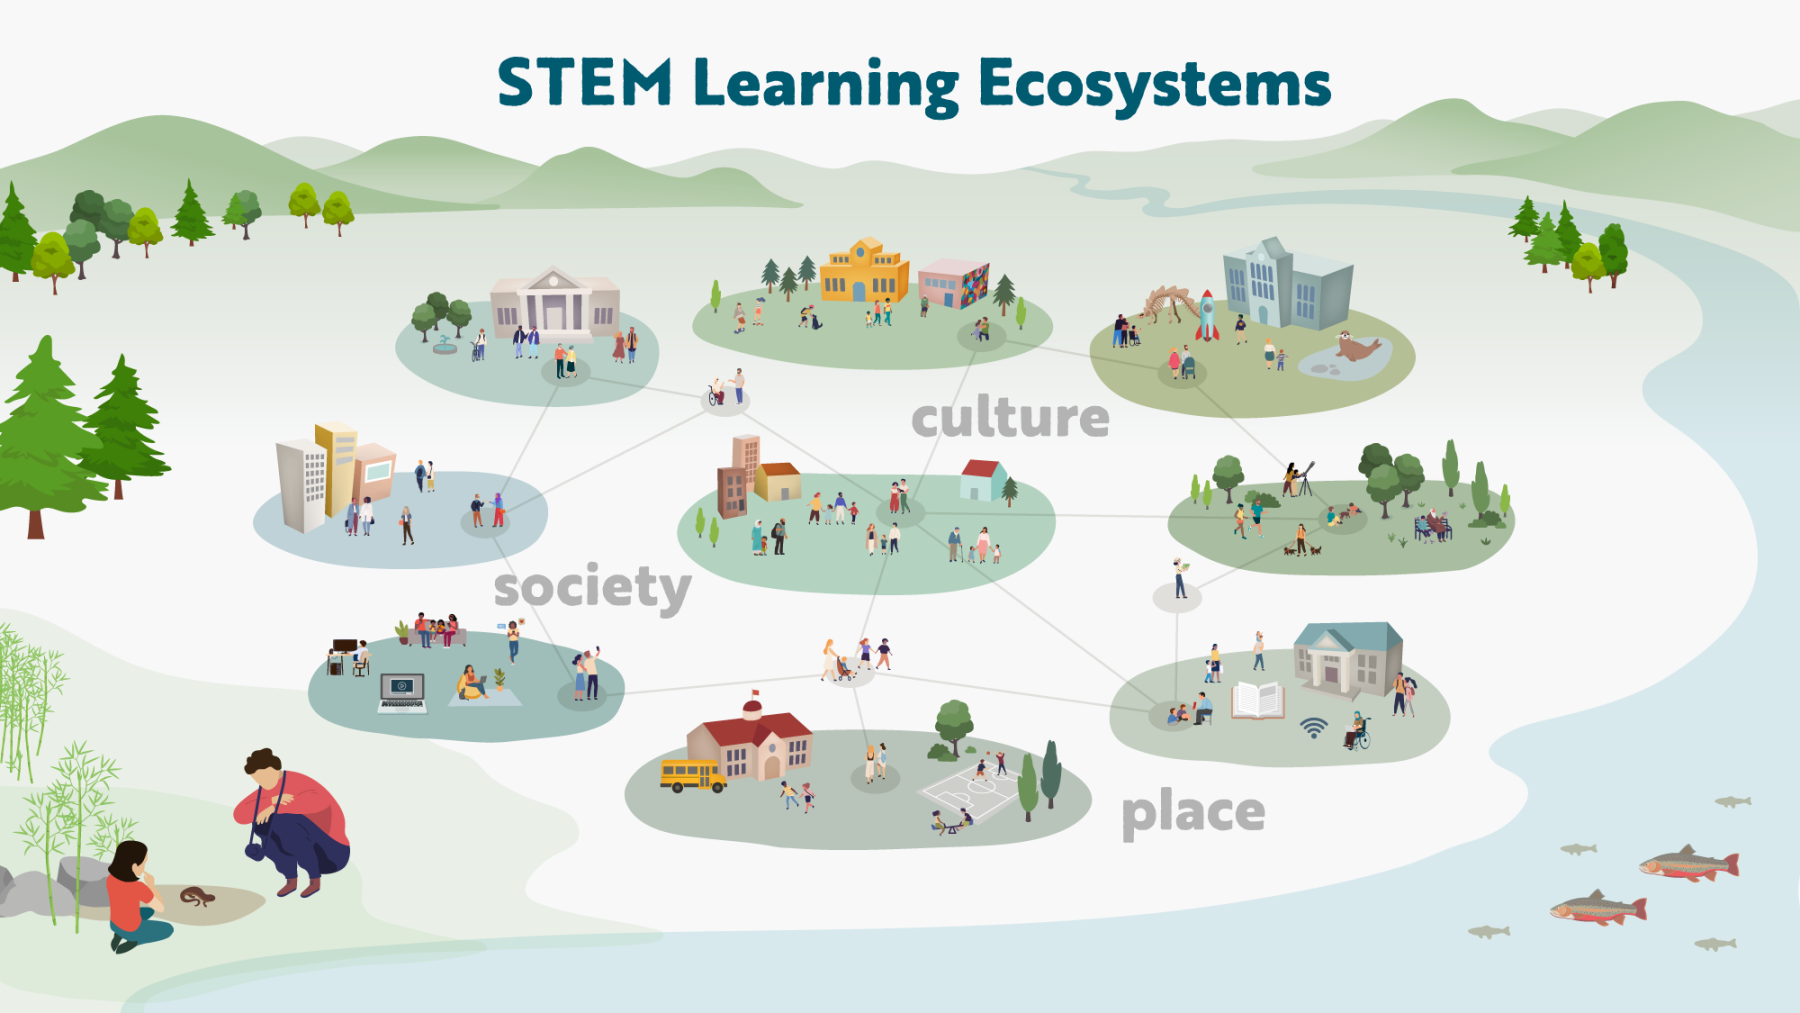 STEM Learning Ecosystem generalized example in context with large text culture, society, and place